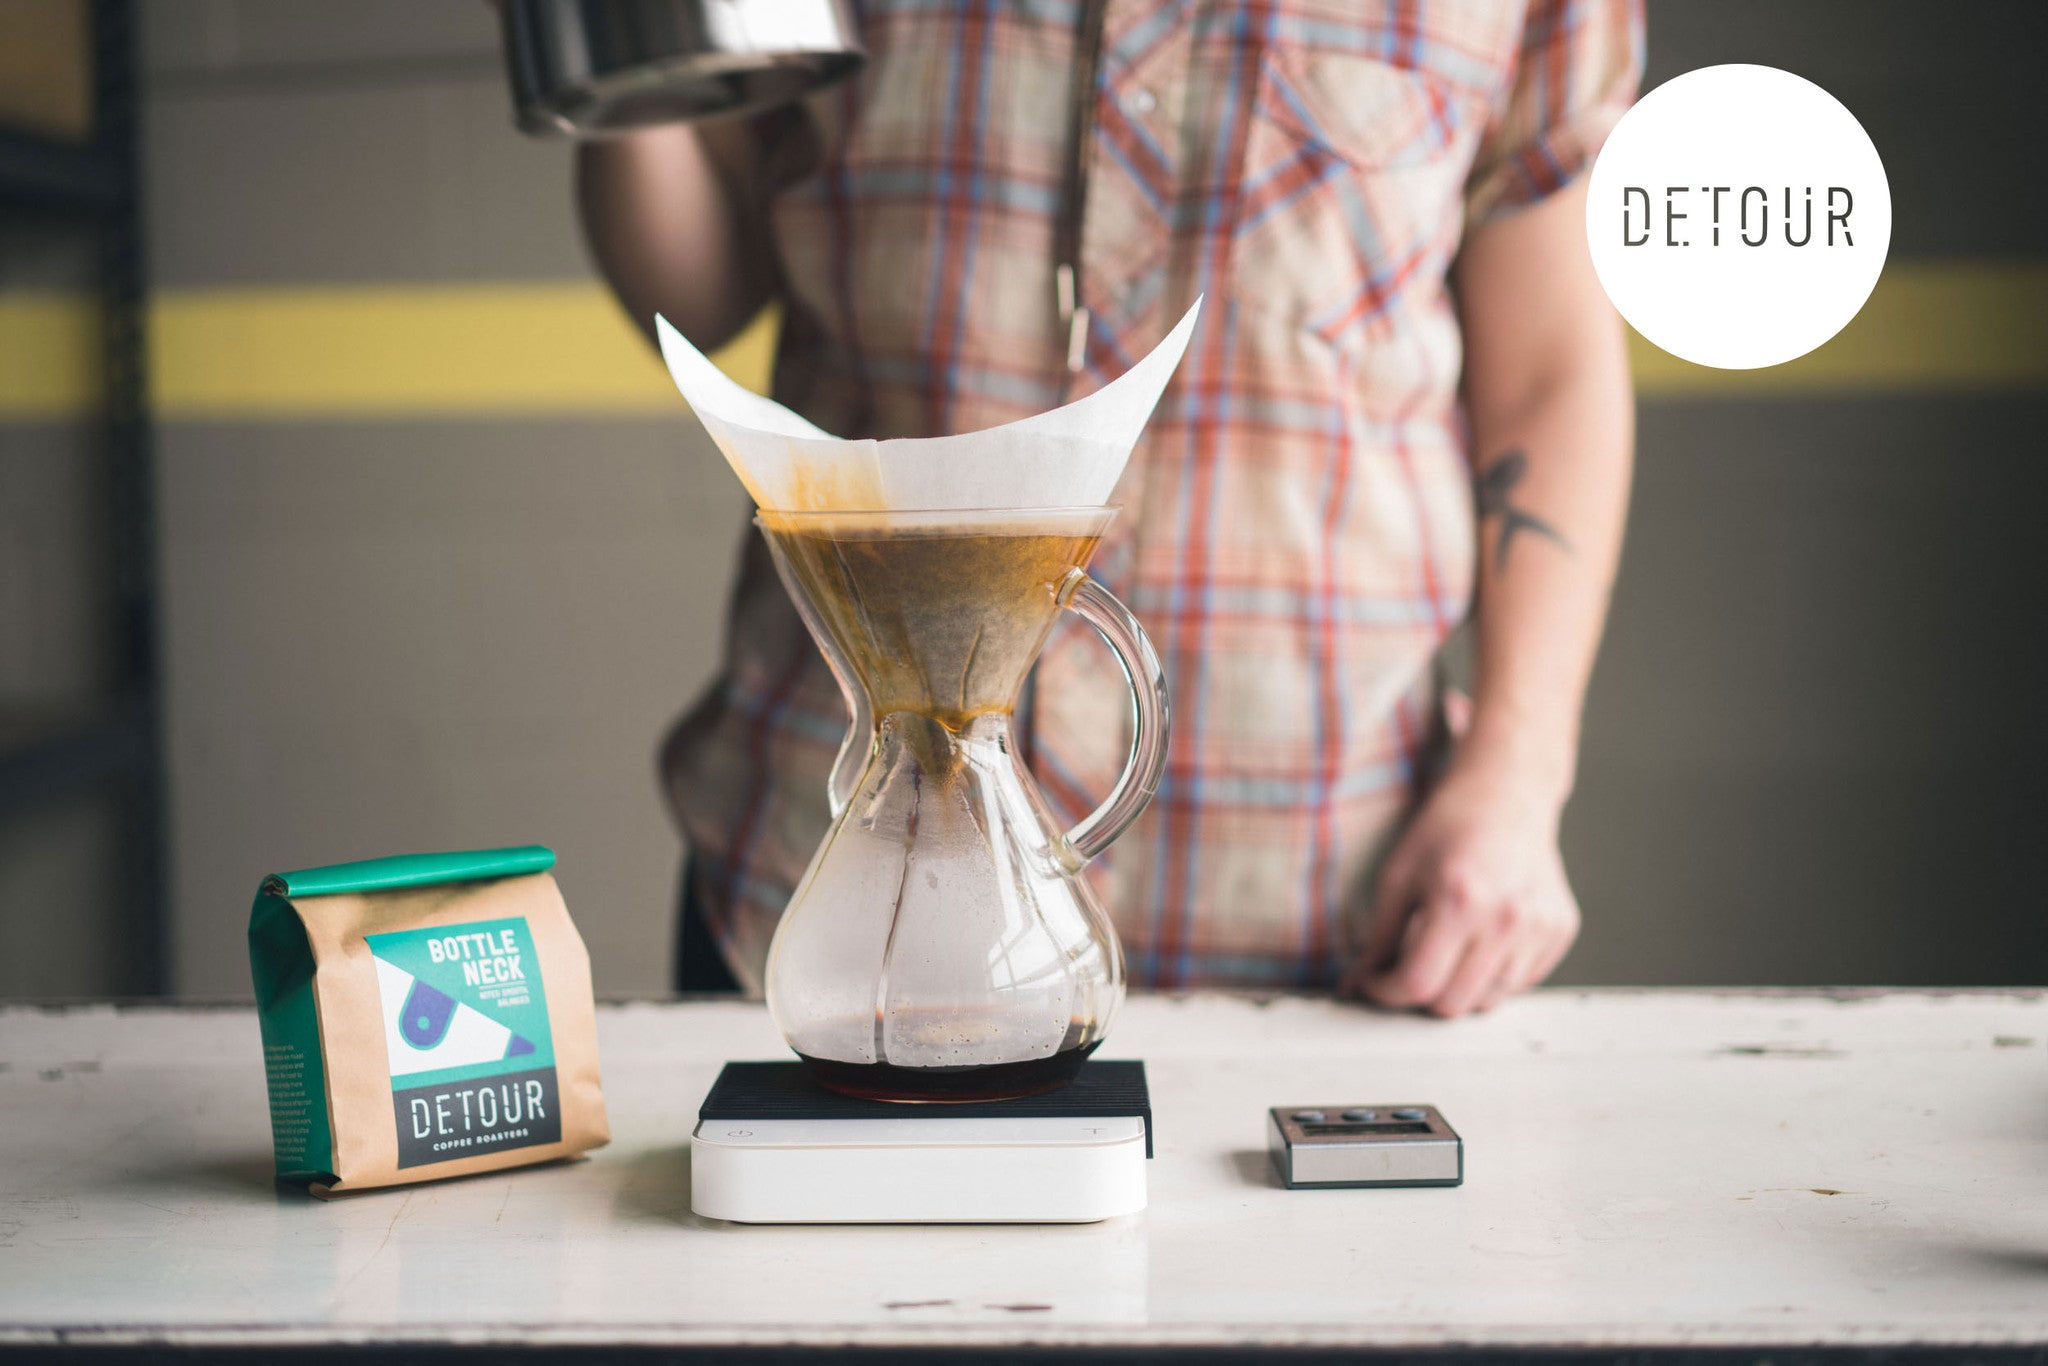 A Guide to the CHEMEX - James Coffee Co